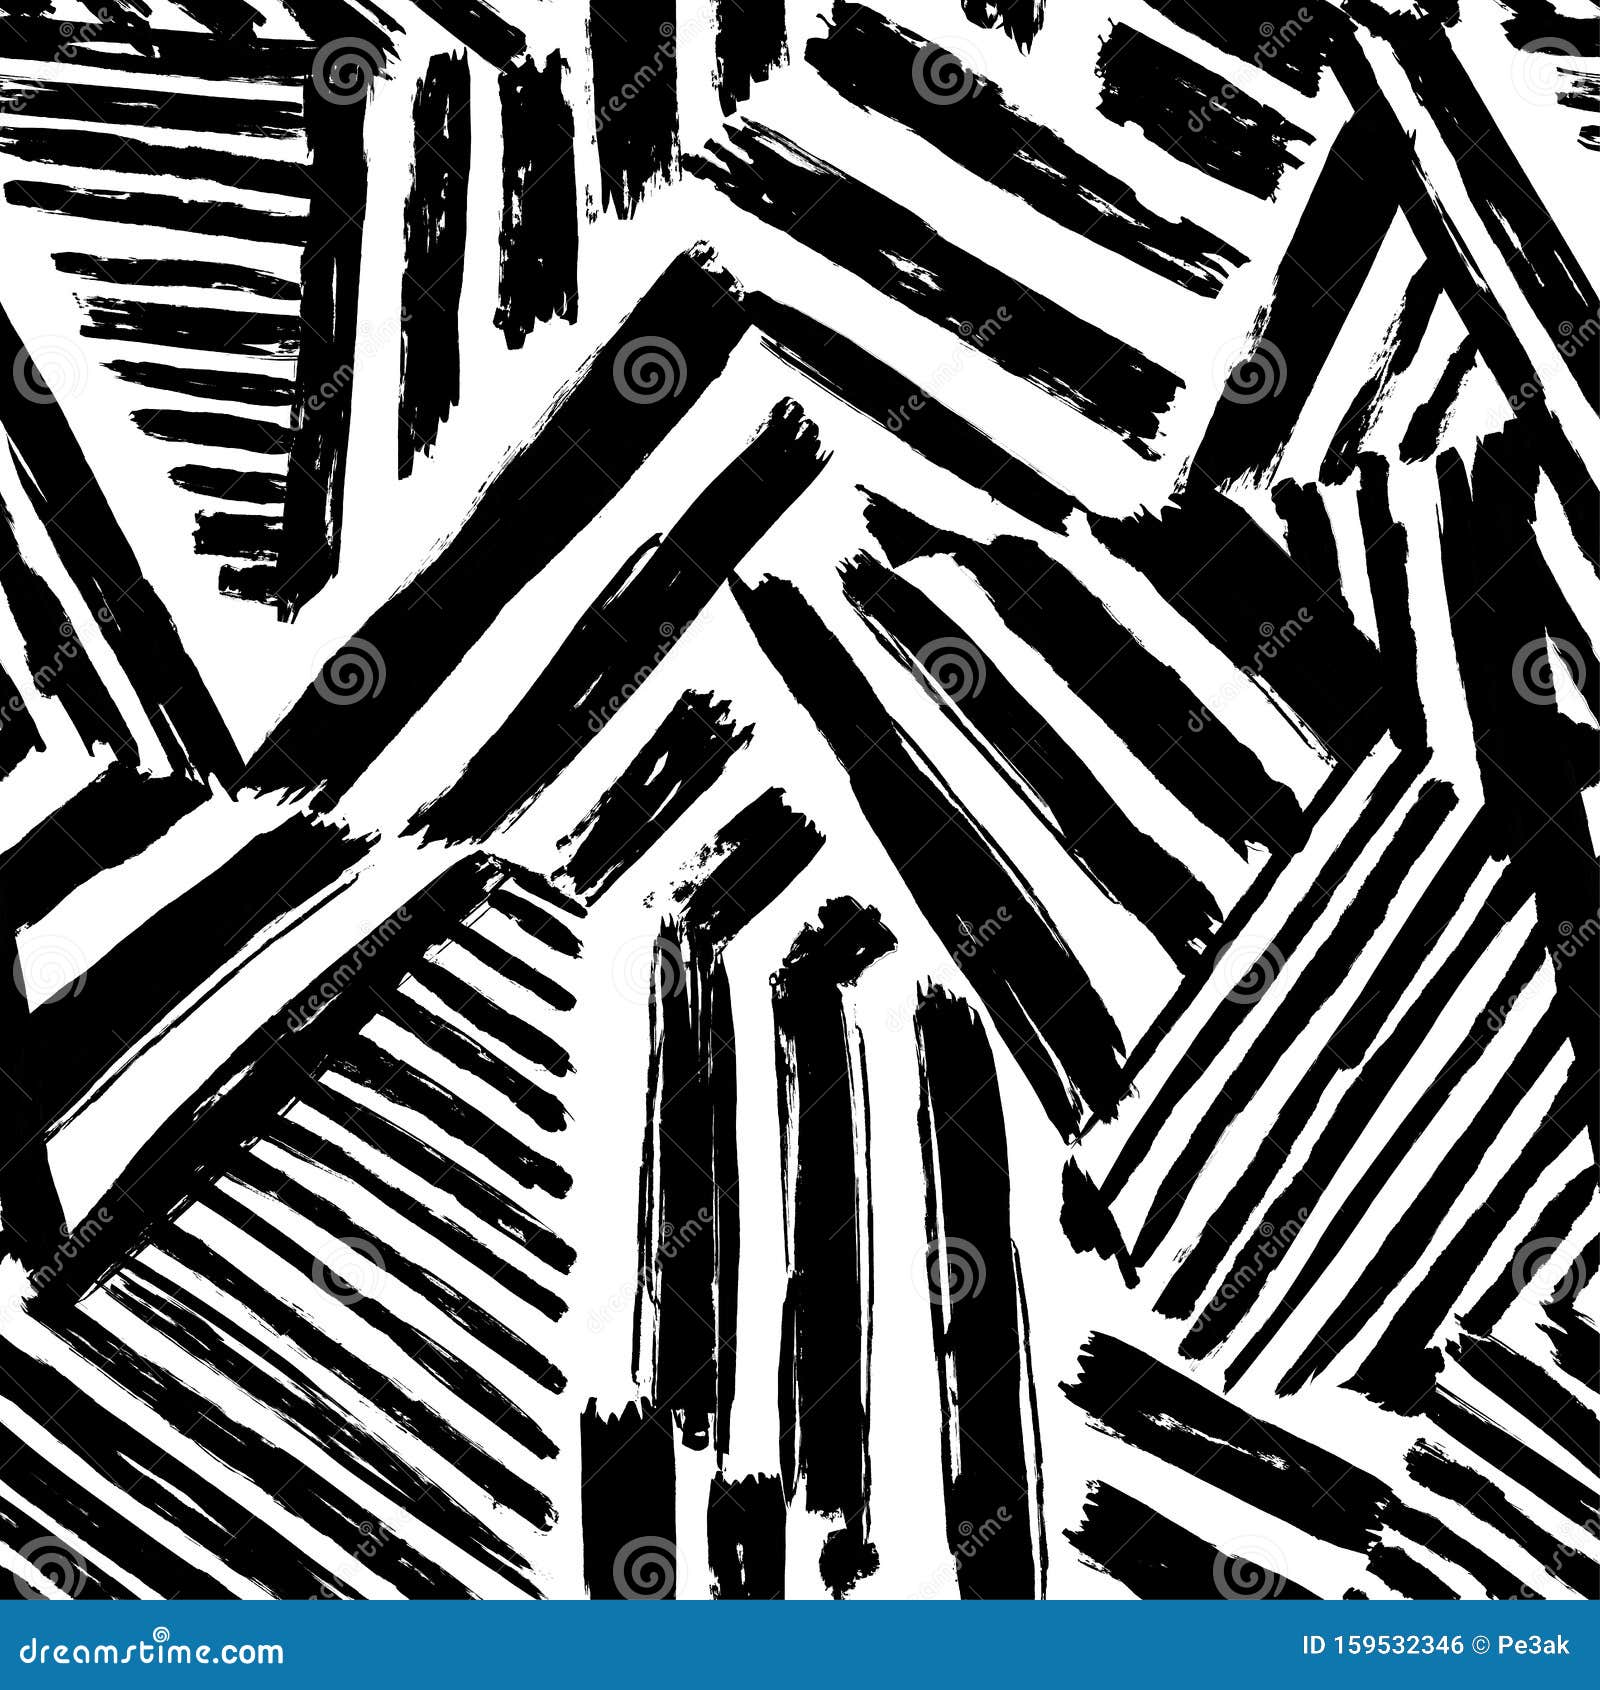 dazzle camouflage seamless abstract pattern